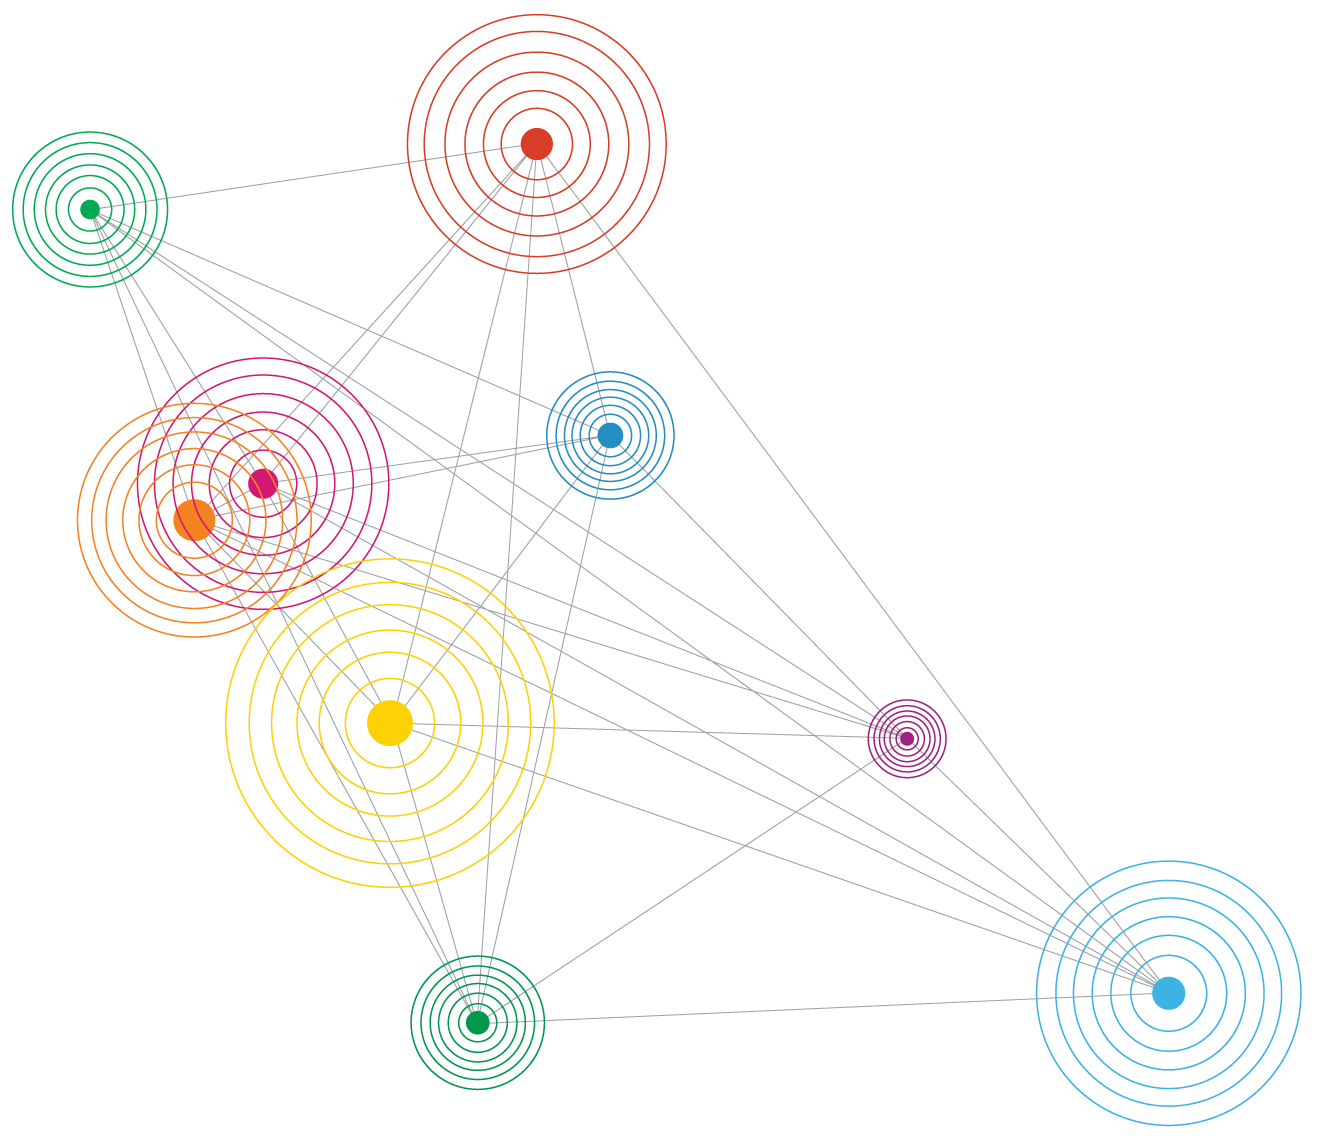 abstract diagram of multicolored concentric rings connected by diagonal lines